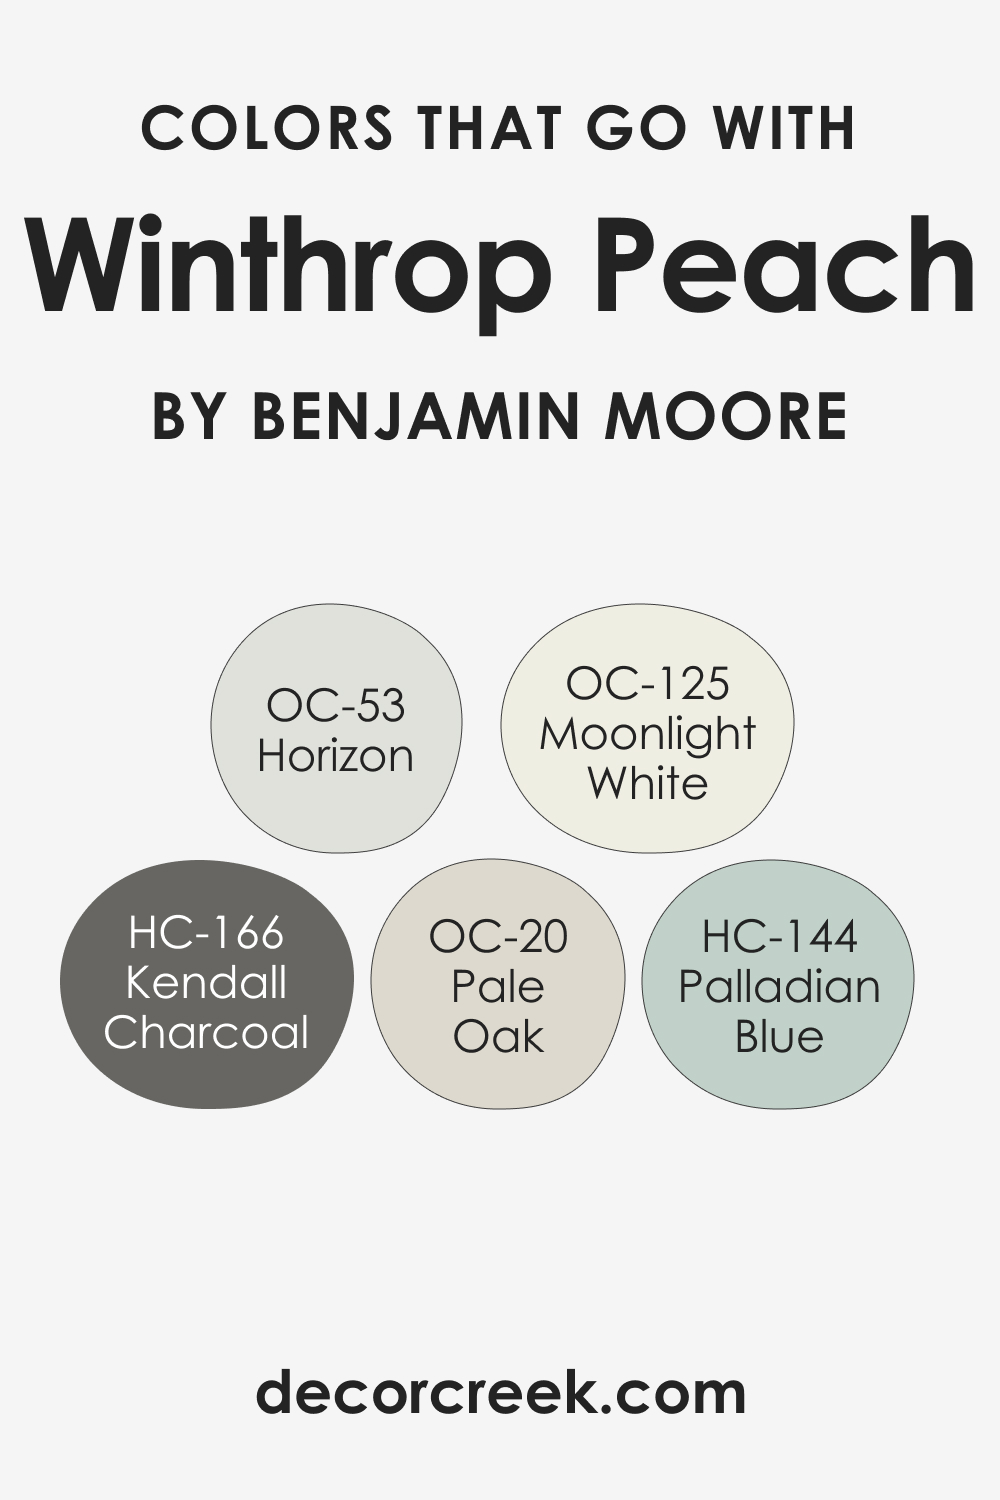 Colors That Go With Winthrop Peach HC-55